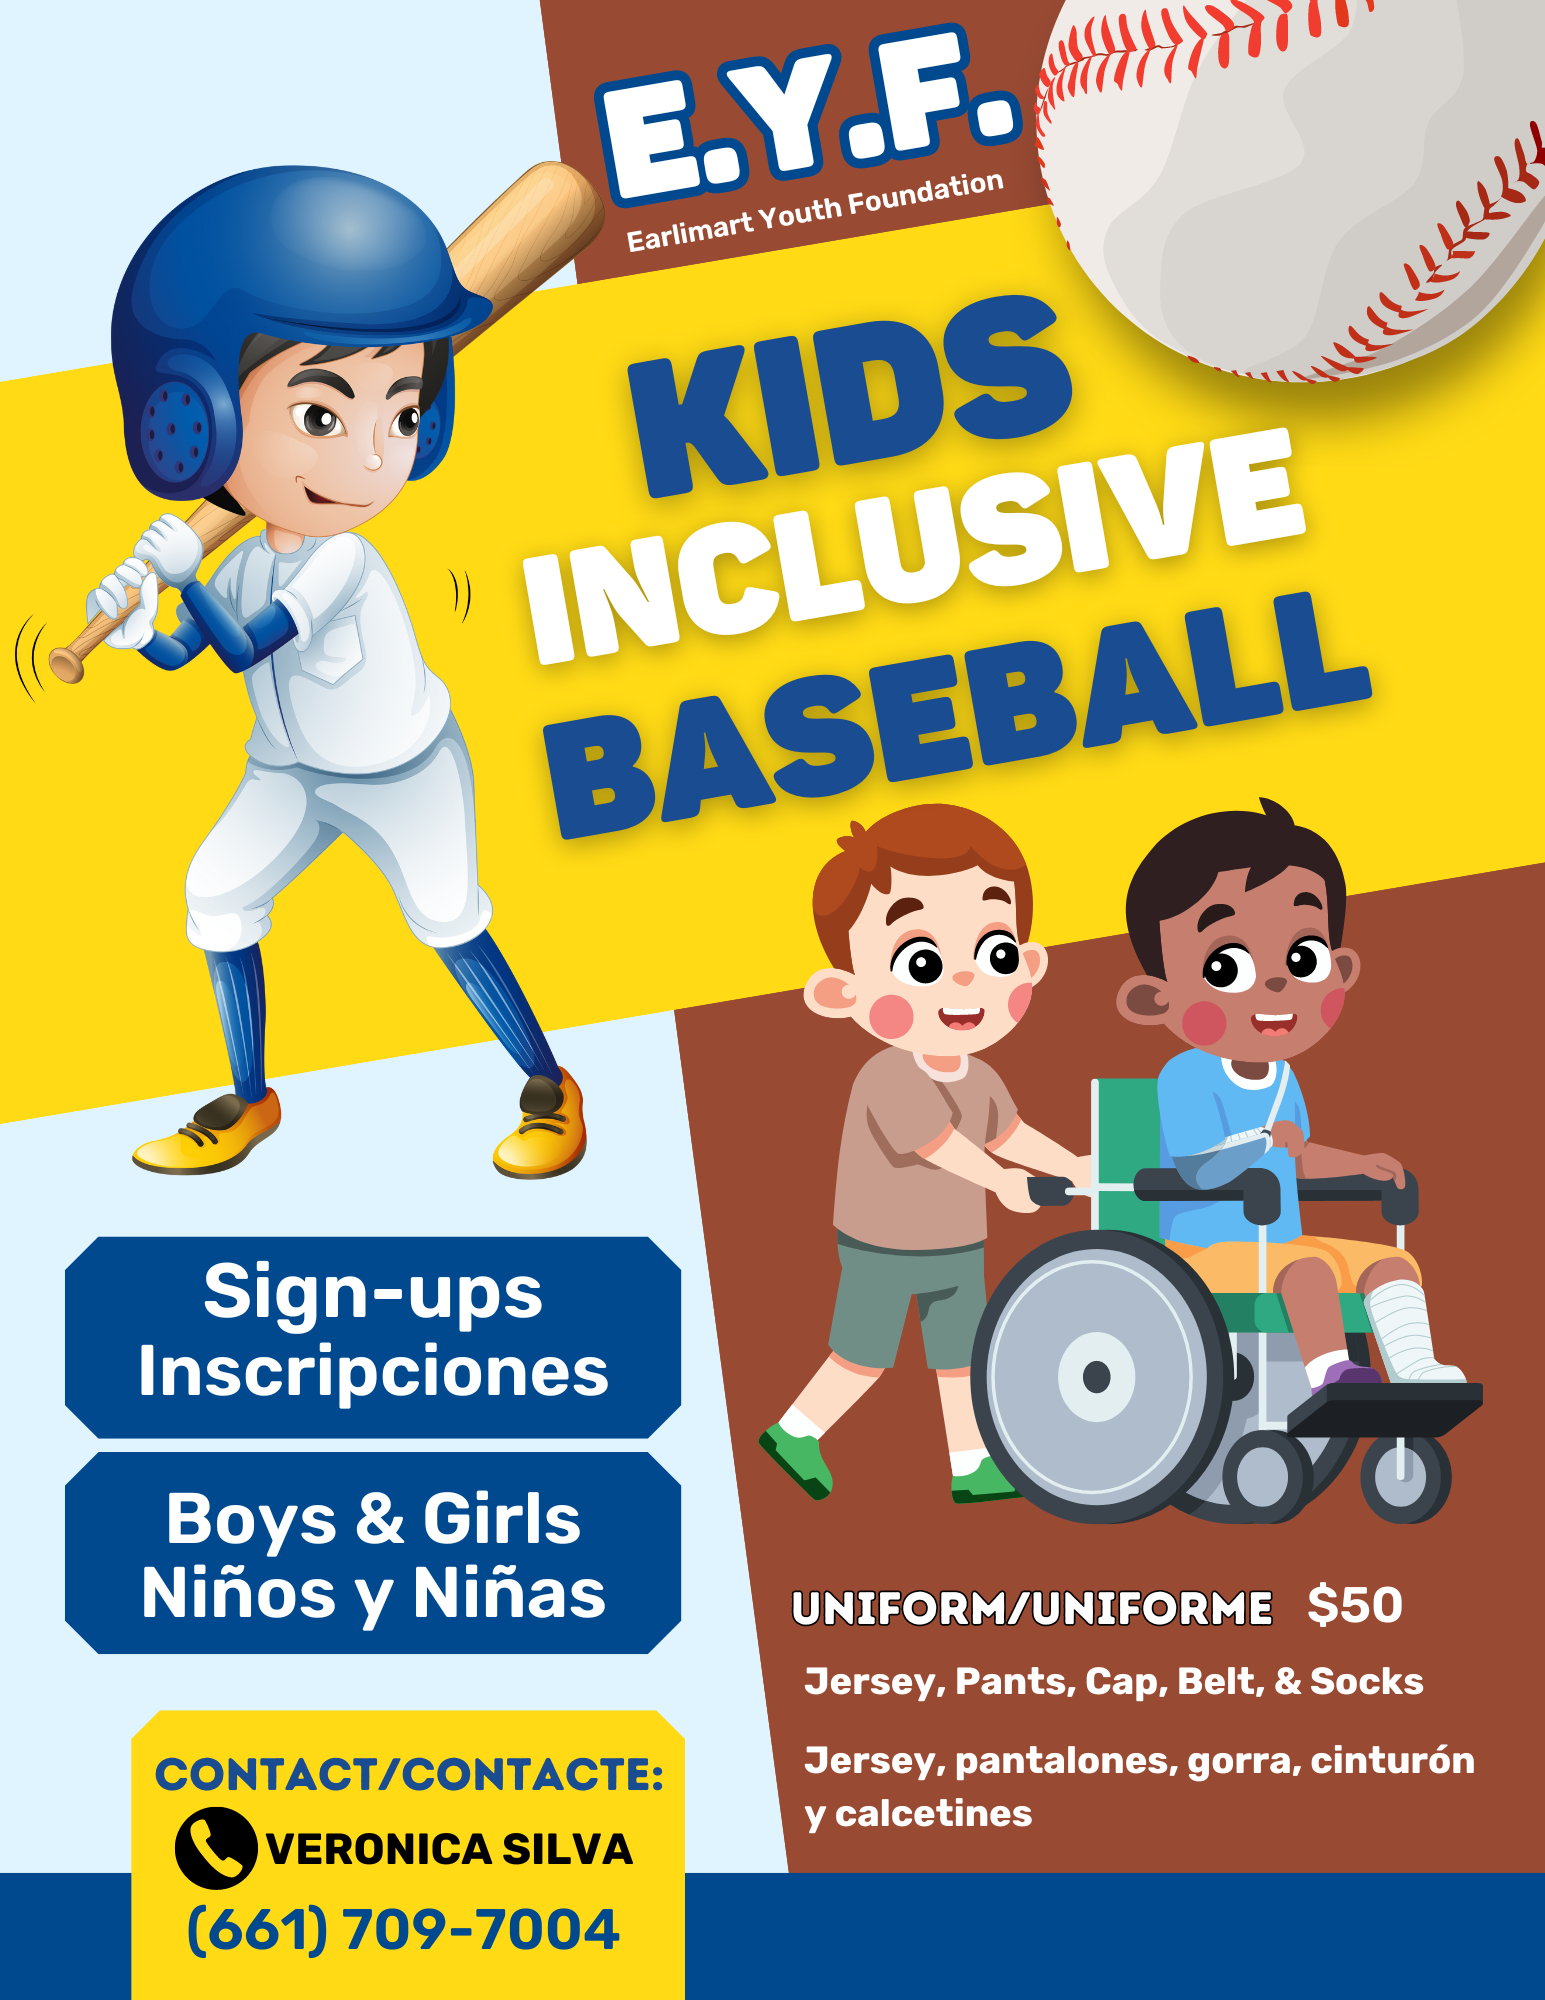 Child playing baseball, child pushing a child in a wheelchair